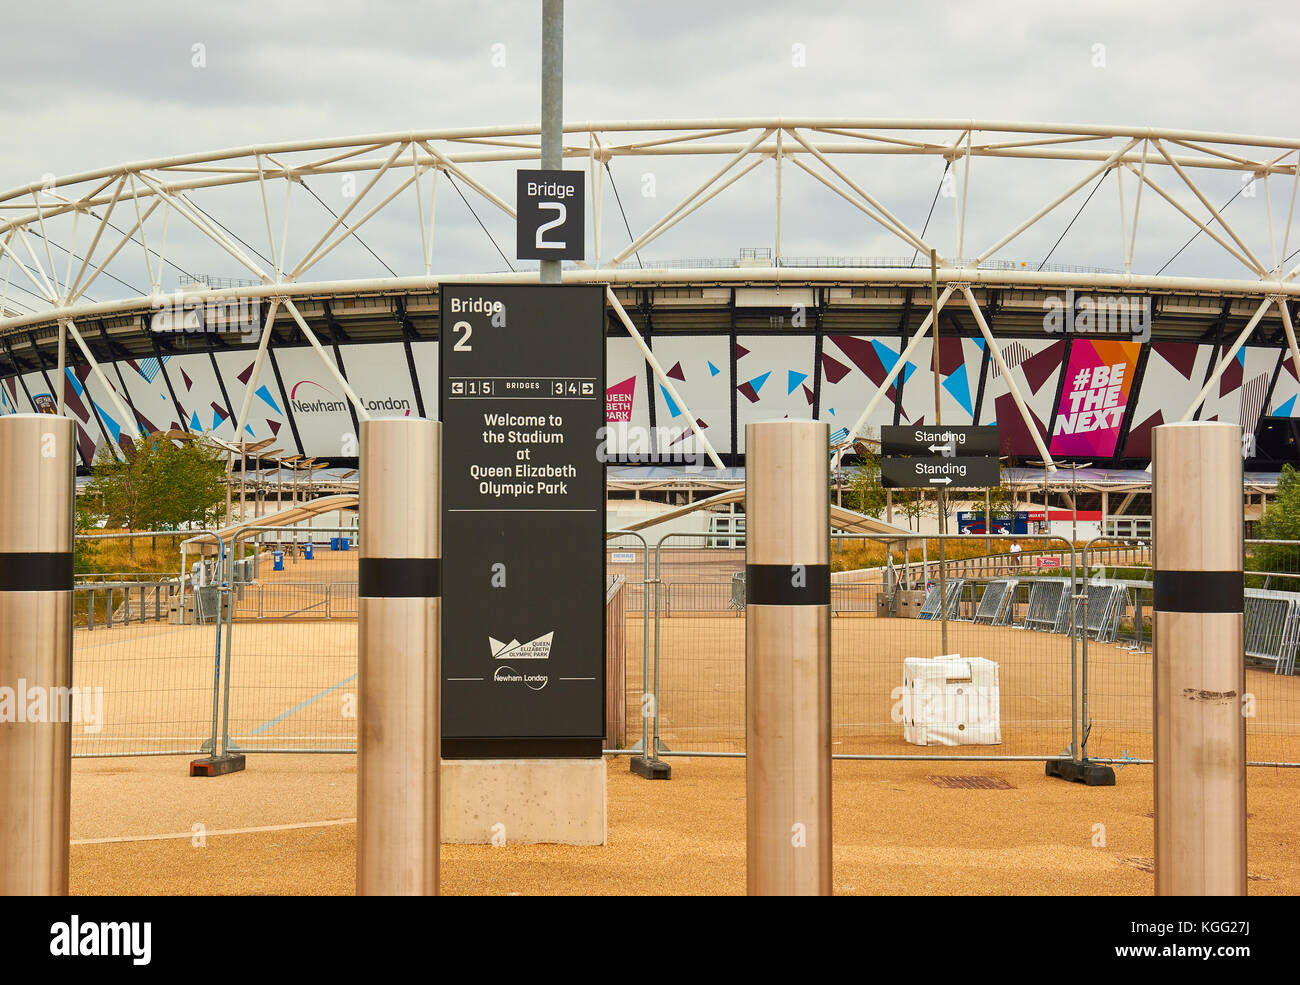 London 2012 Olympic Stadium now the home of West Ham United football club, Queen Elizabeth Olympic Park, Stratford, London Stock Photo